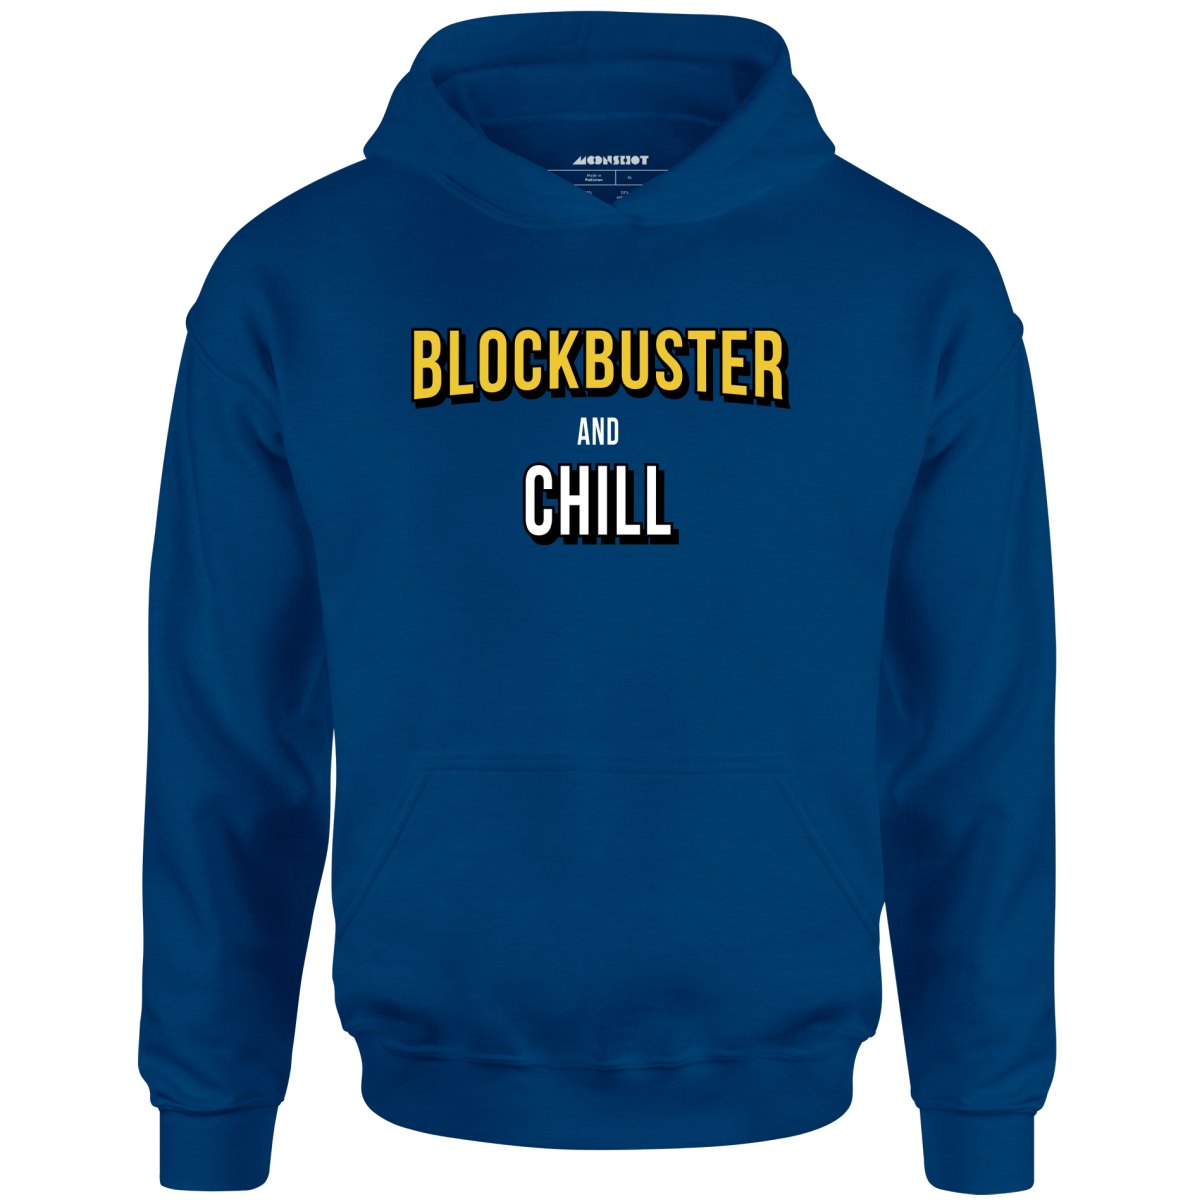 Blockbuster and Chill - Unisex Hoodie